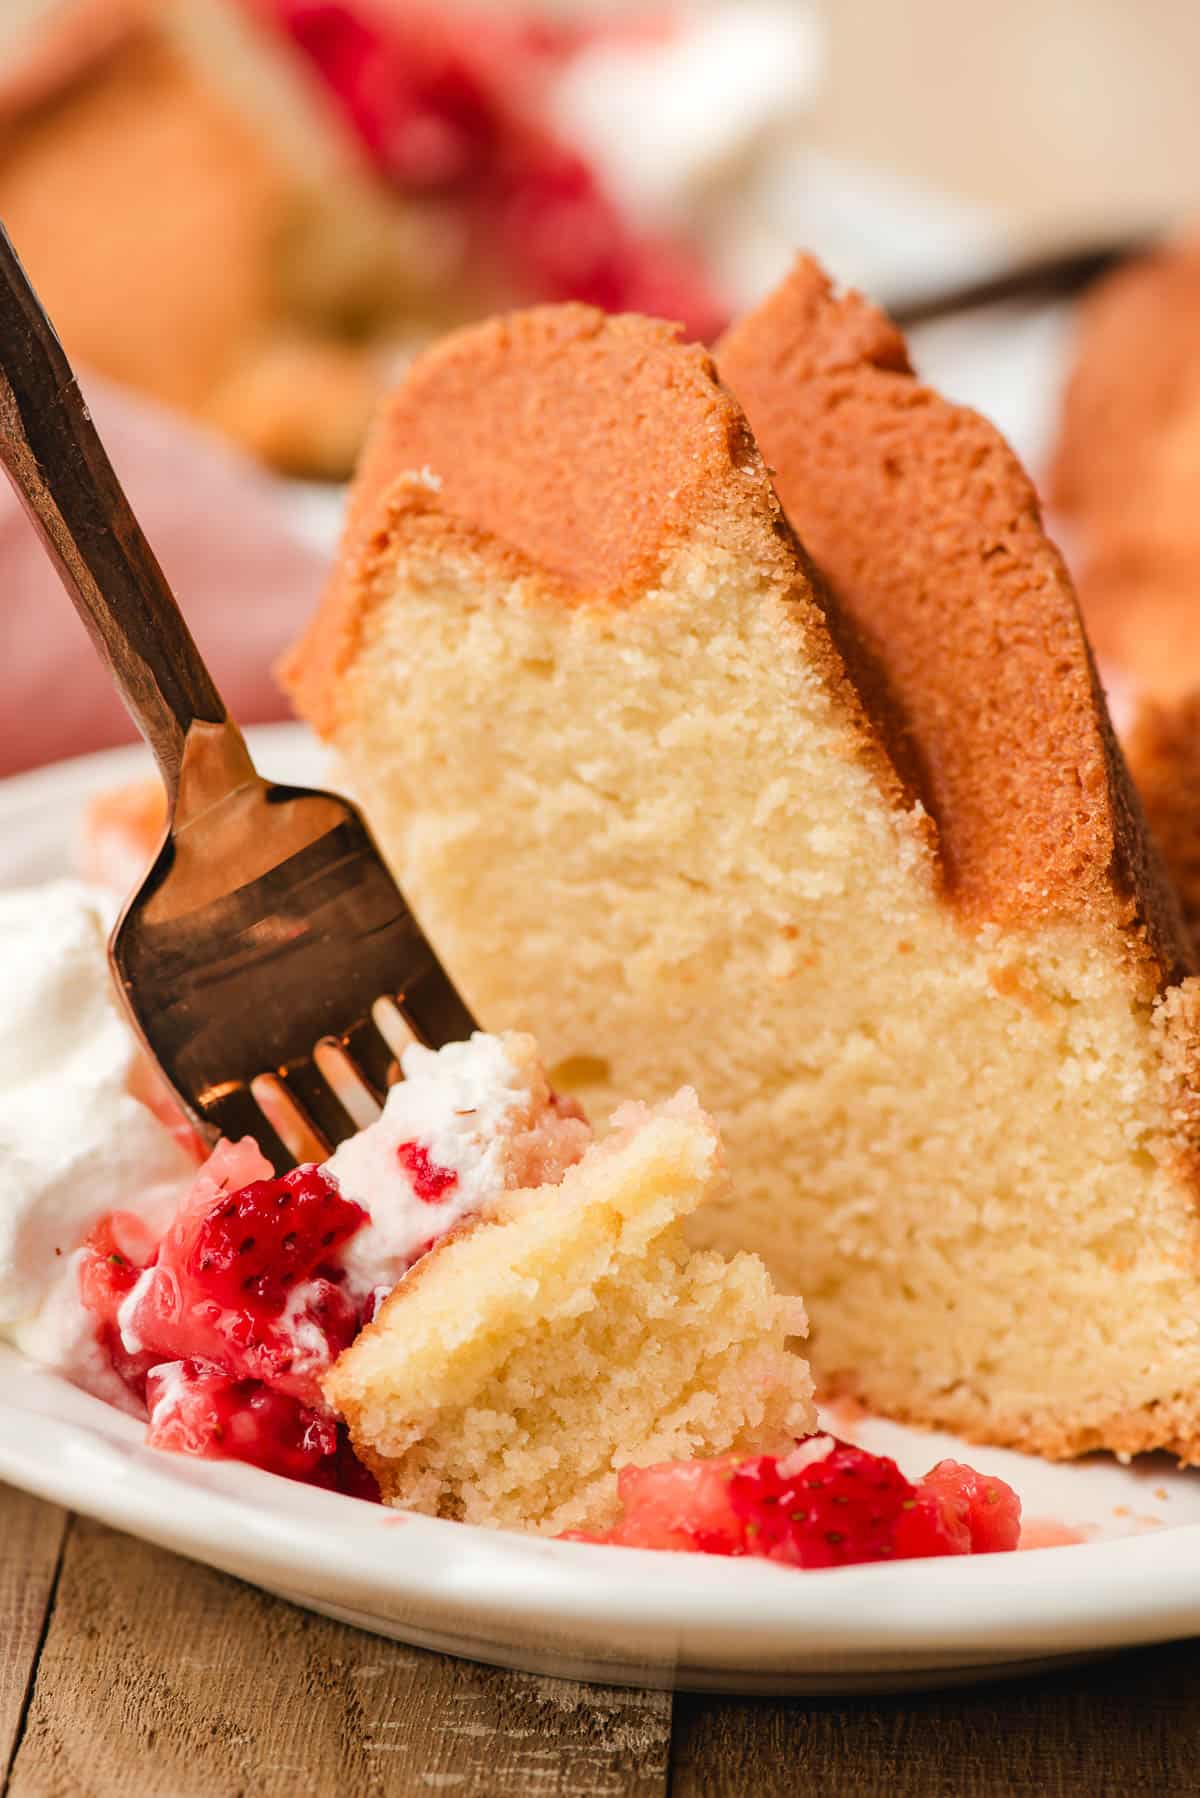 Fork stabbing a bite of pound cake with whipped cream and smashed strawberries.